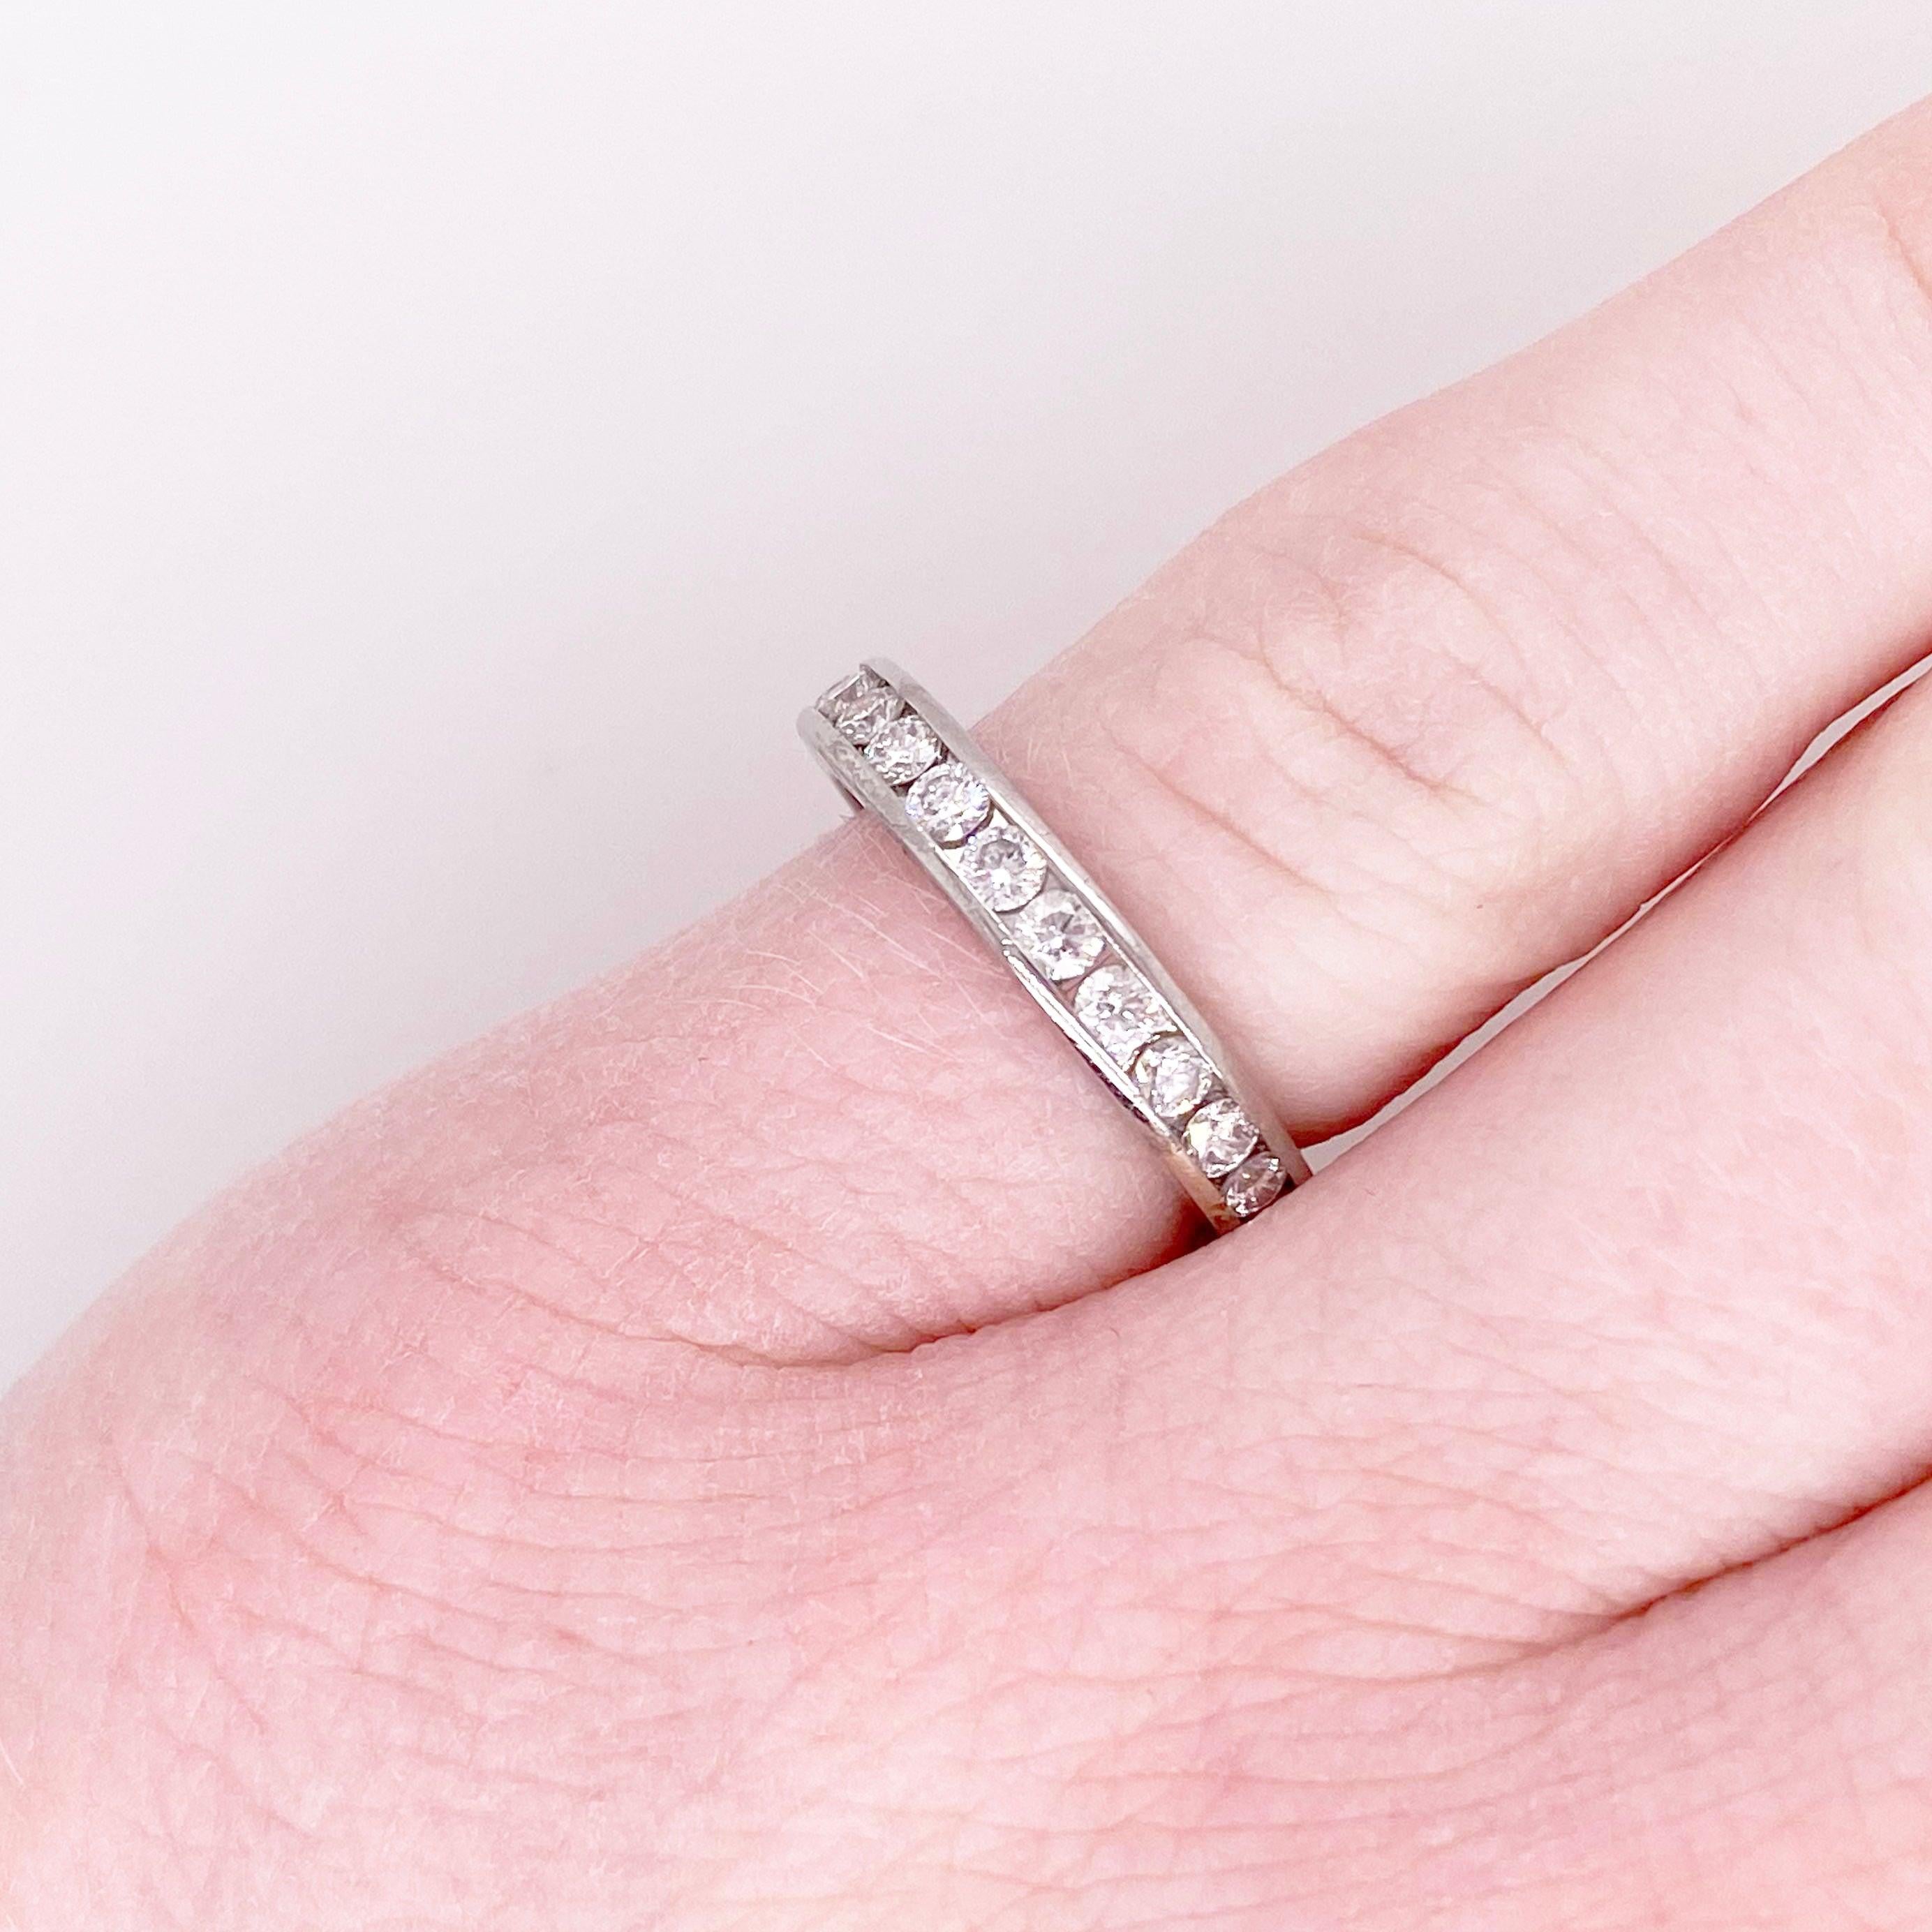 For Sale:  Channel Eternity Band Ring, White Gold, 1.50 Carat Diamond, Infinity 2